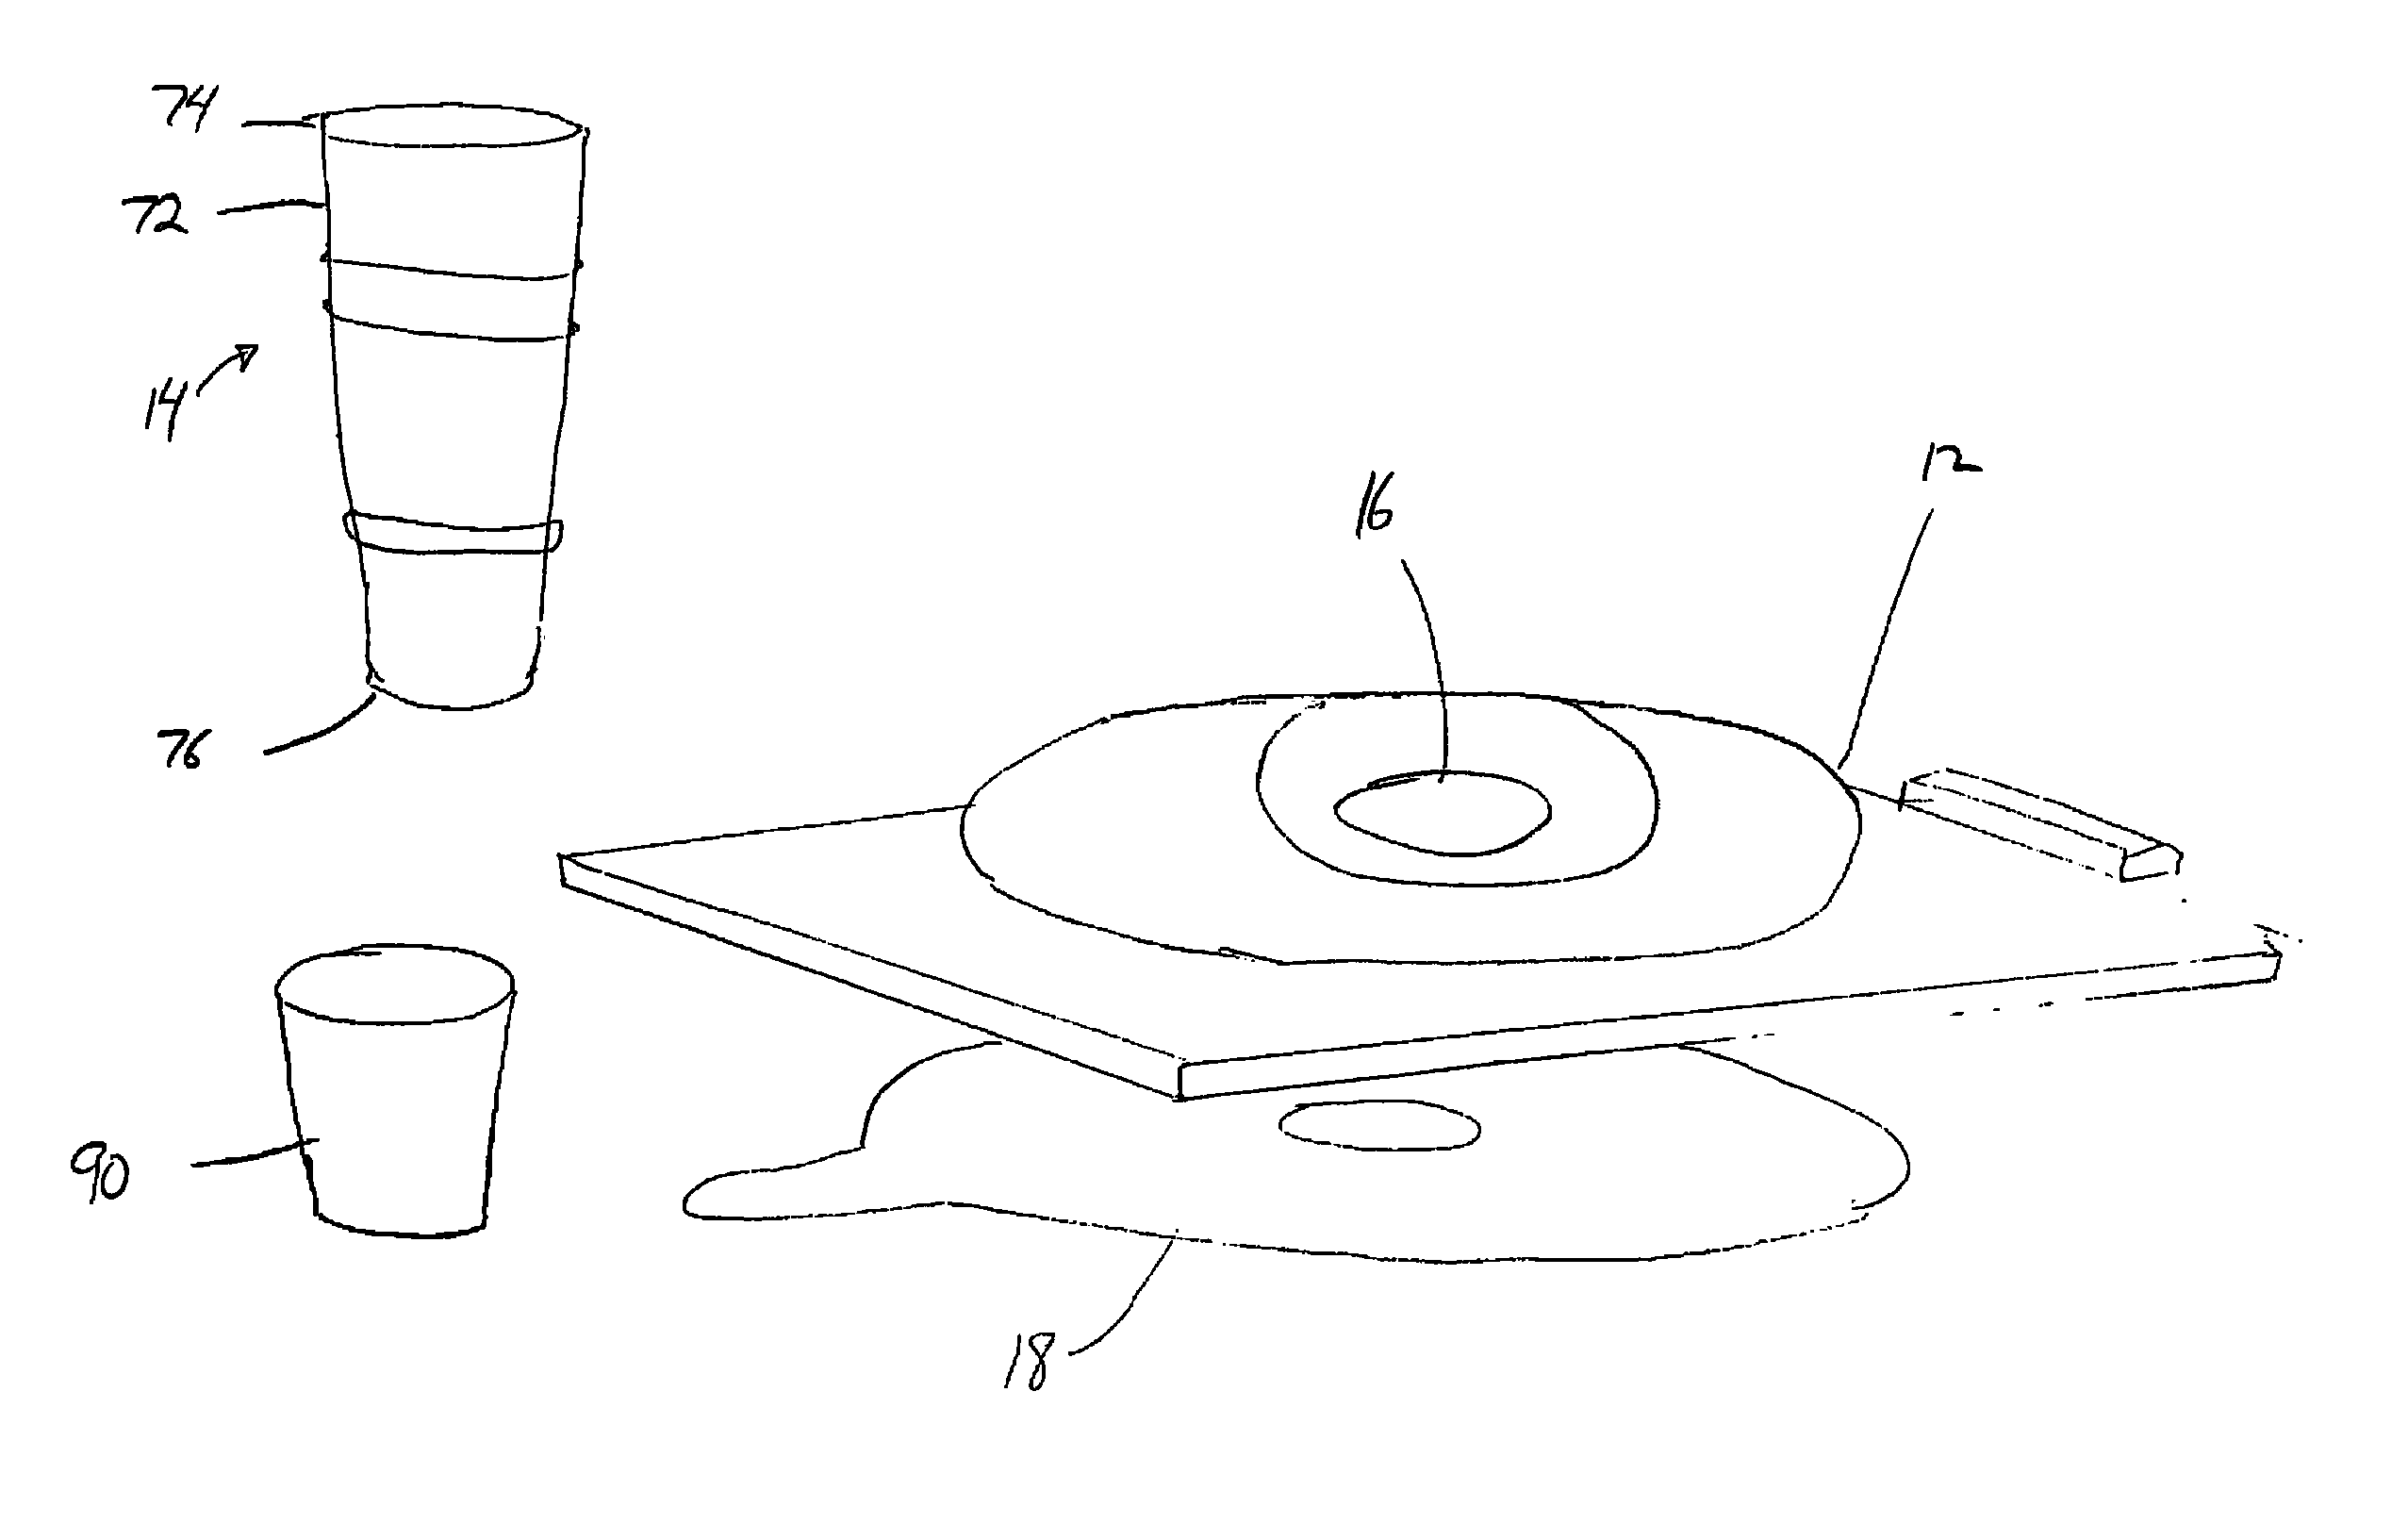 Colostomy alert device and method